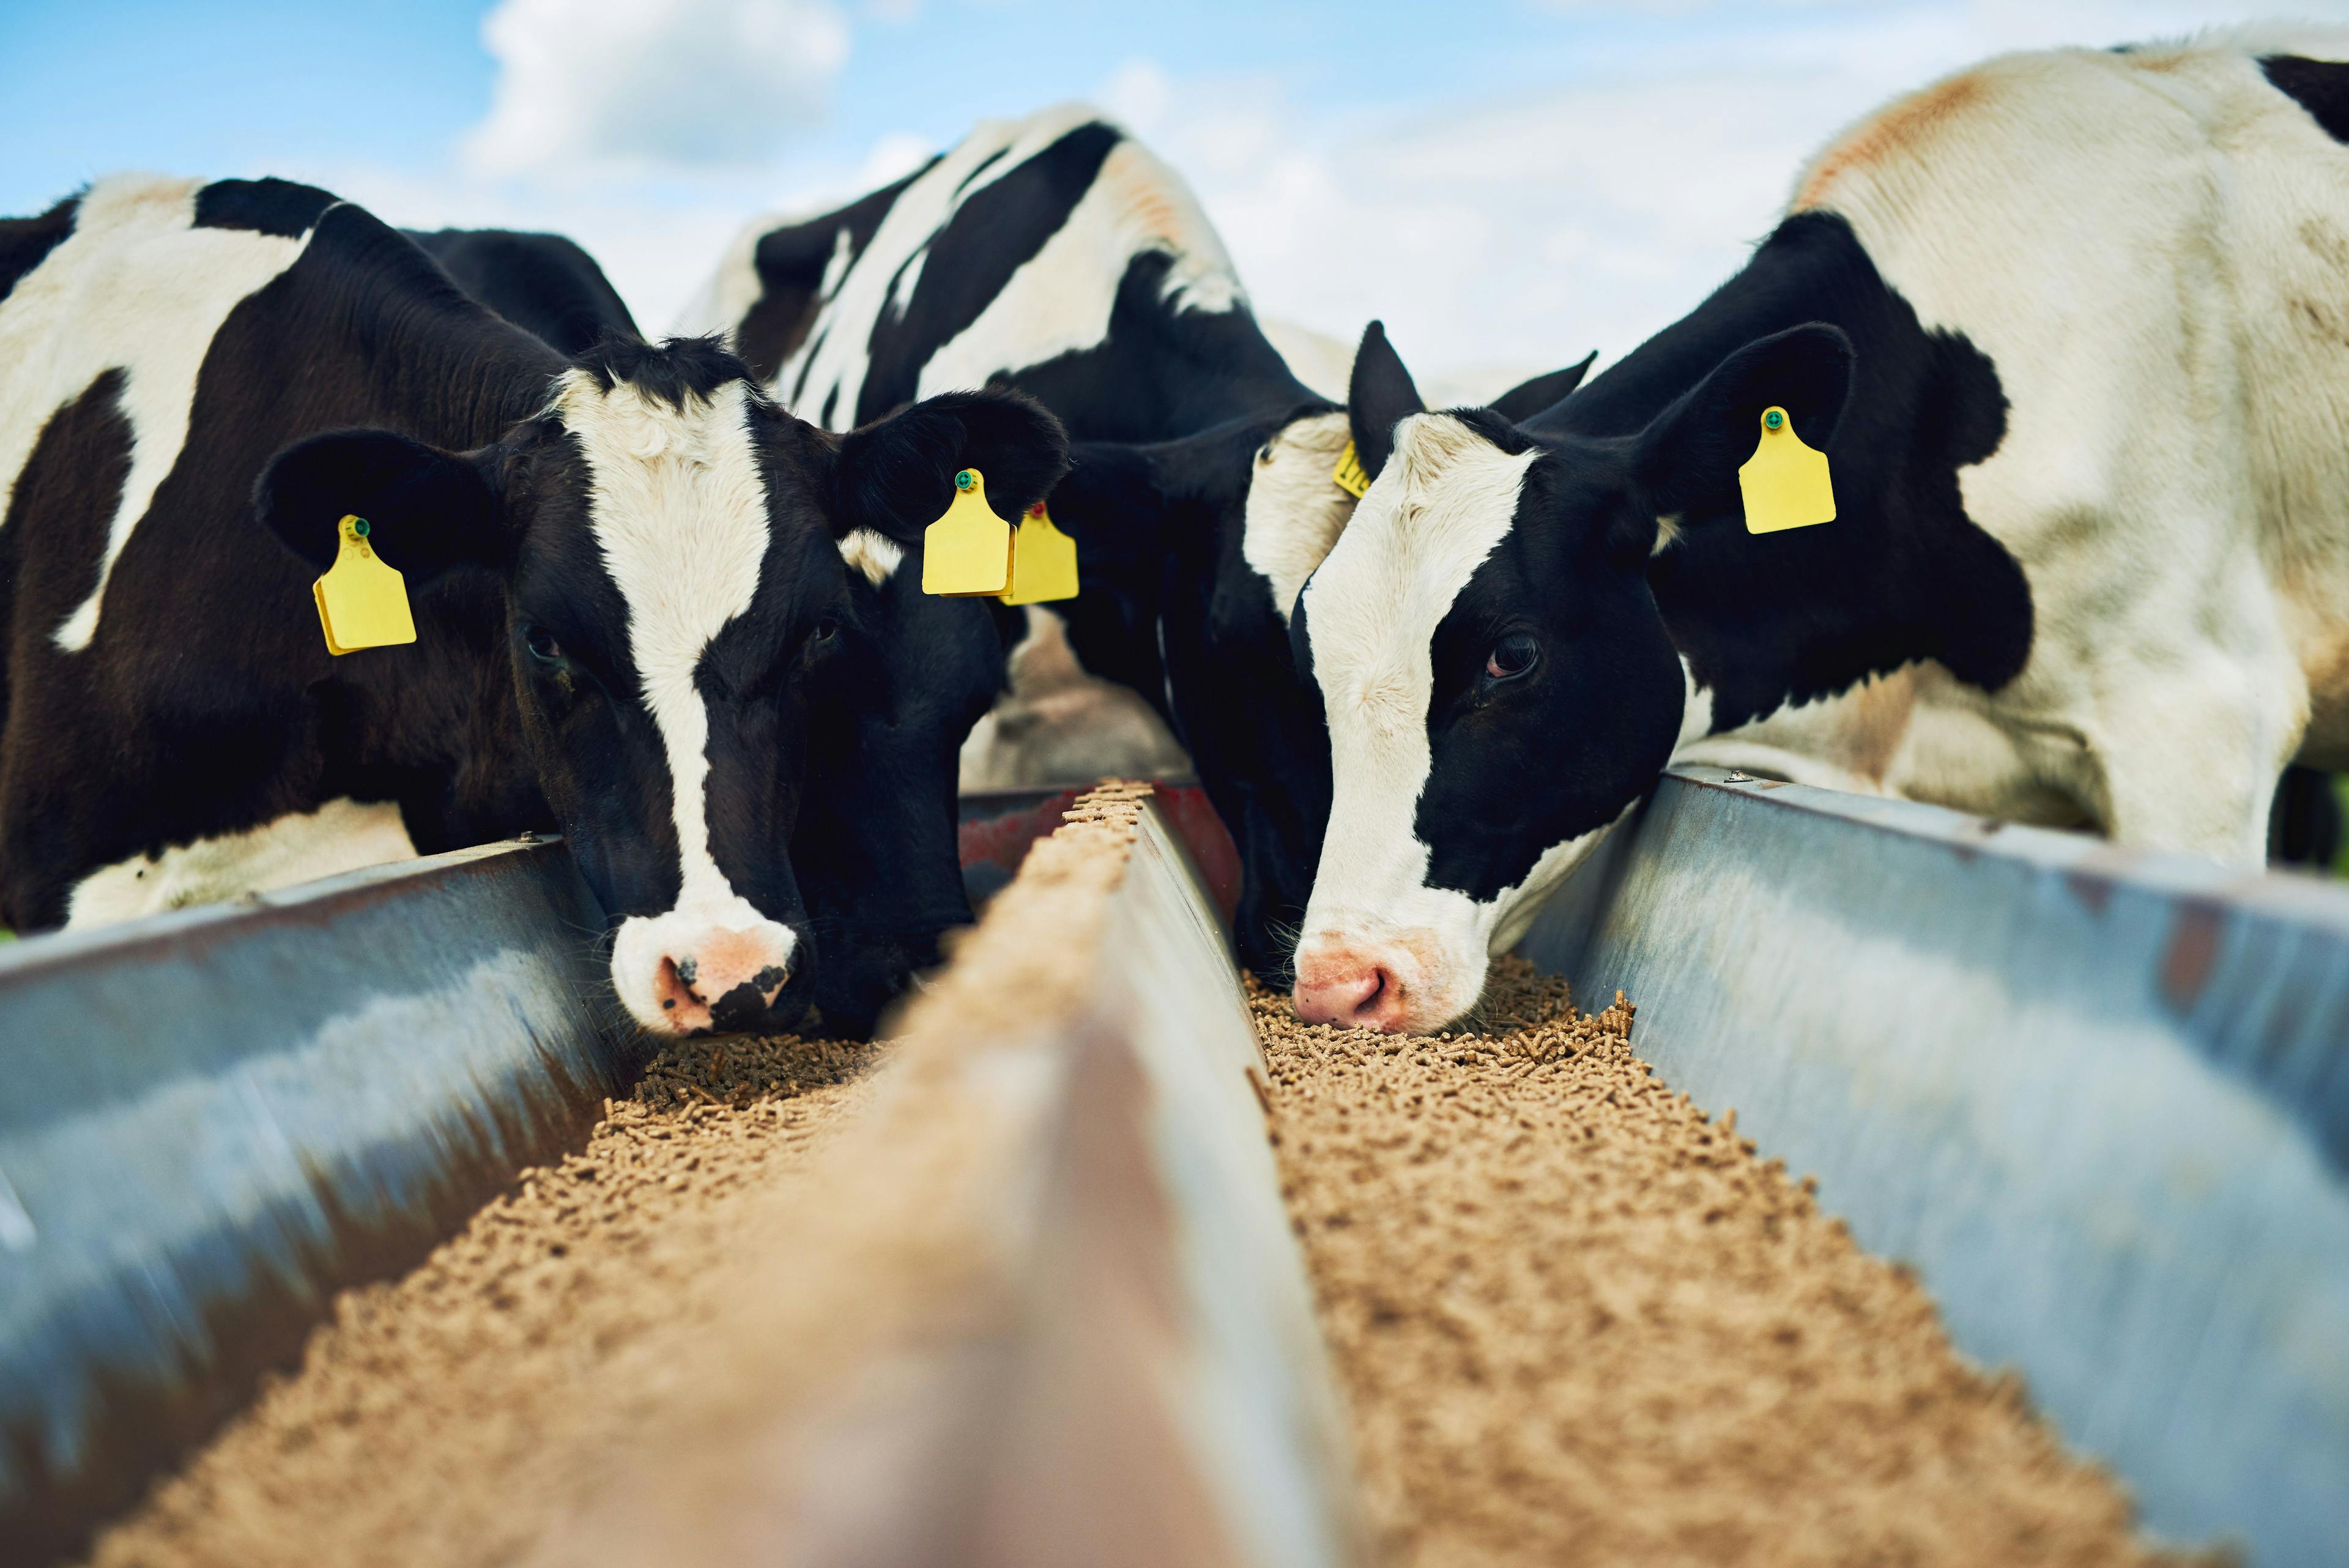 ADM Animal Nutrition includes additional lots of farm animal feed products in new recall expansion